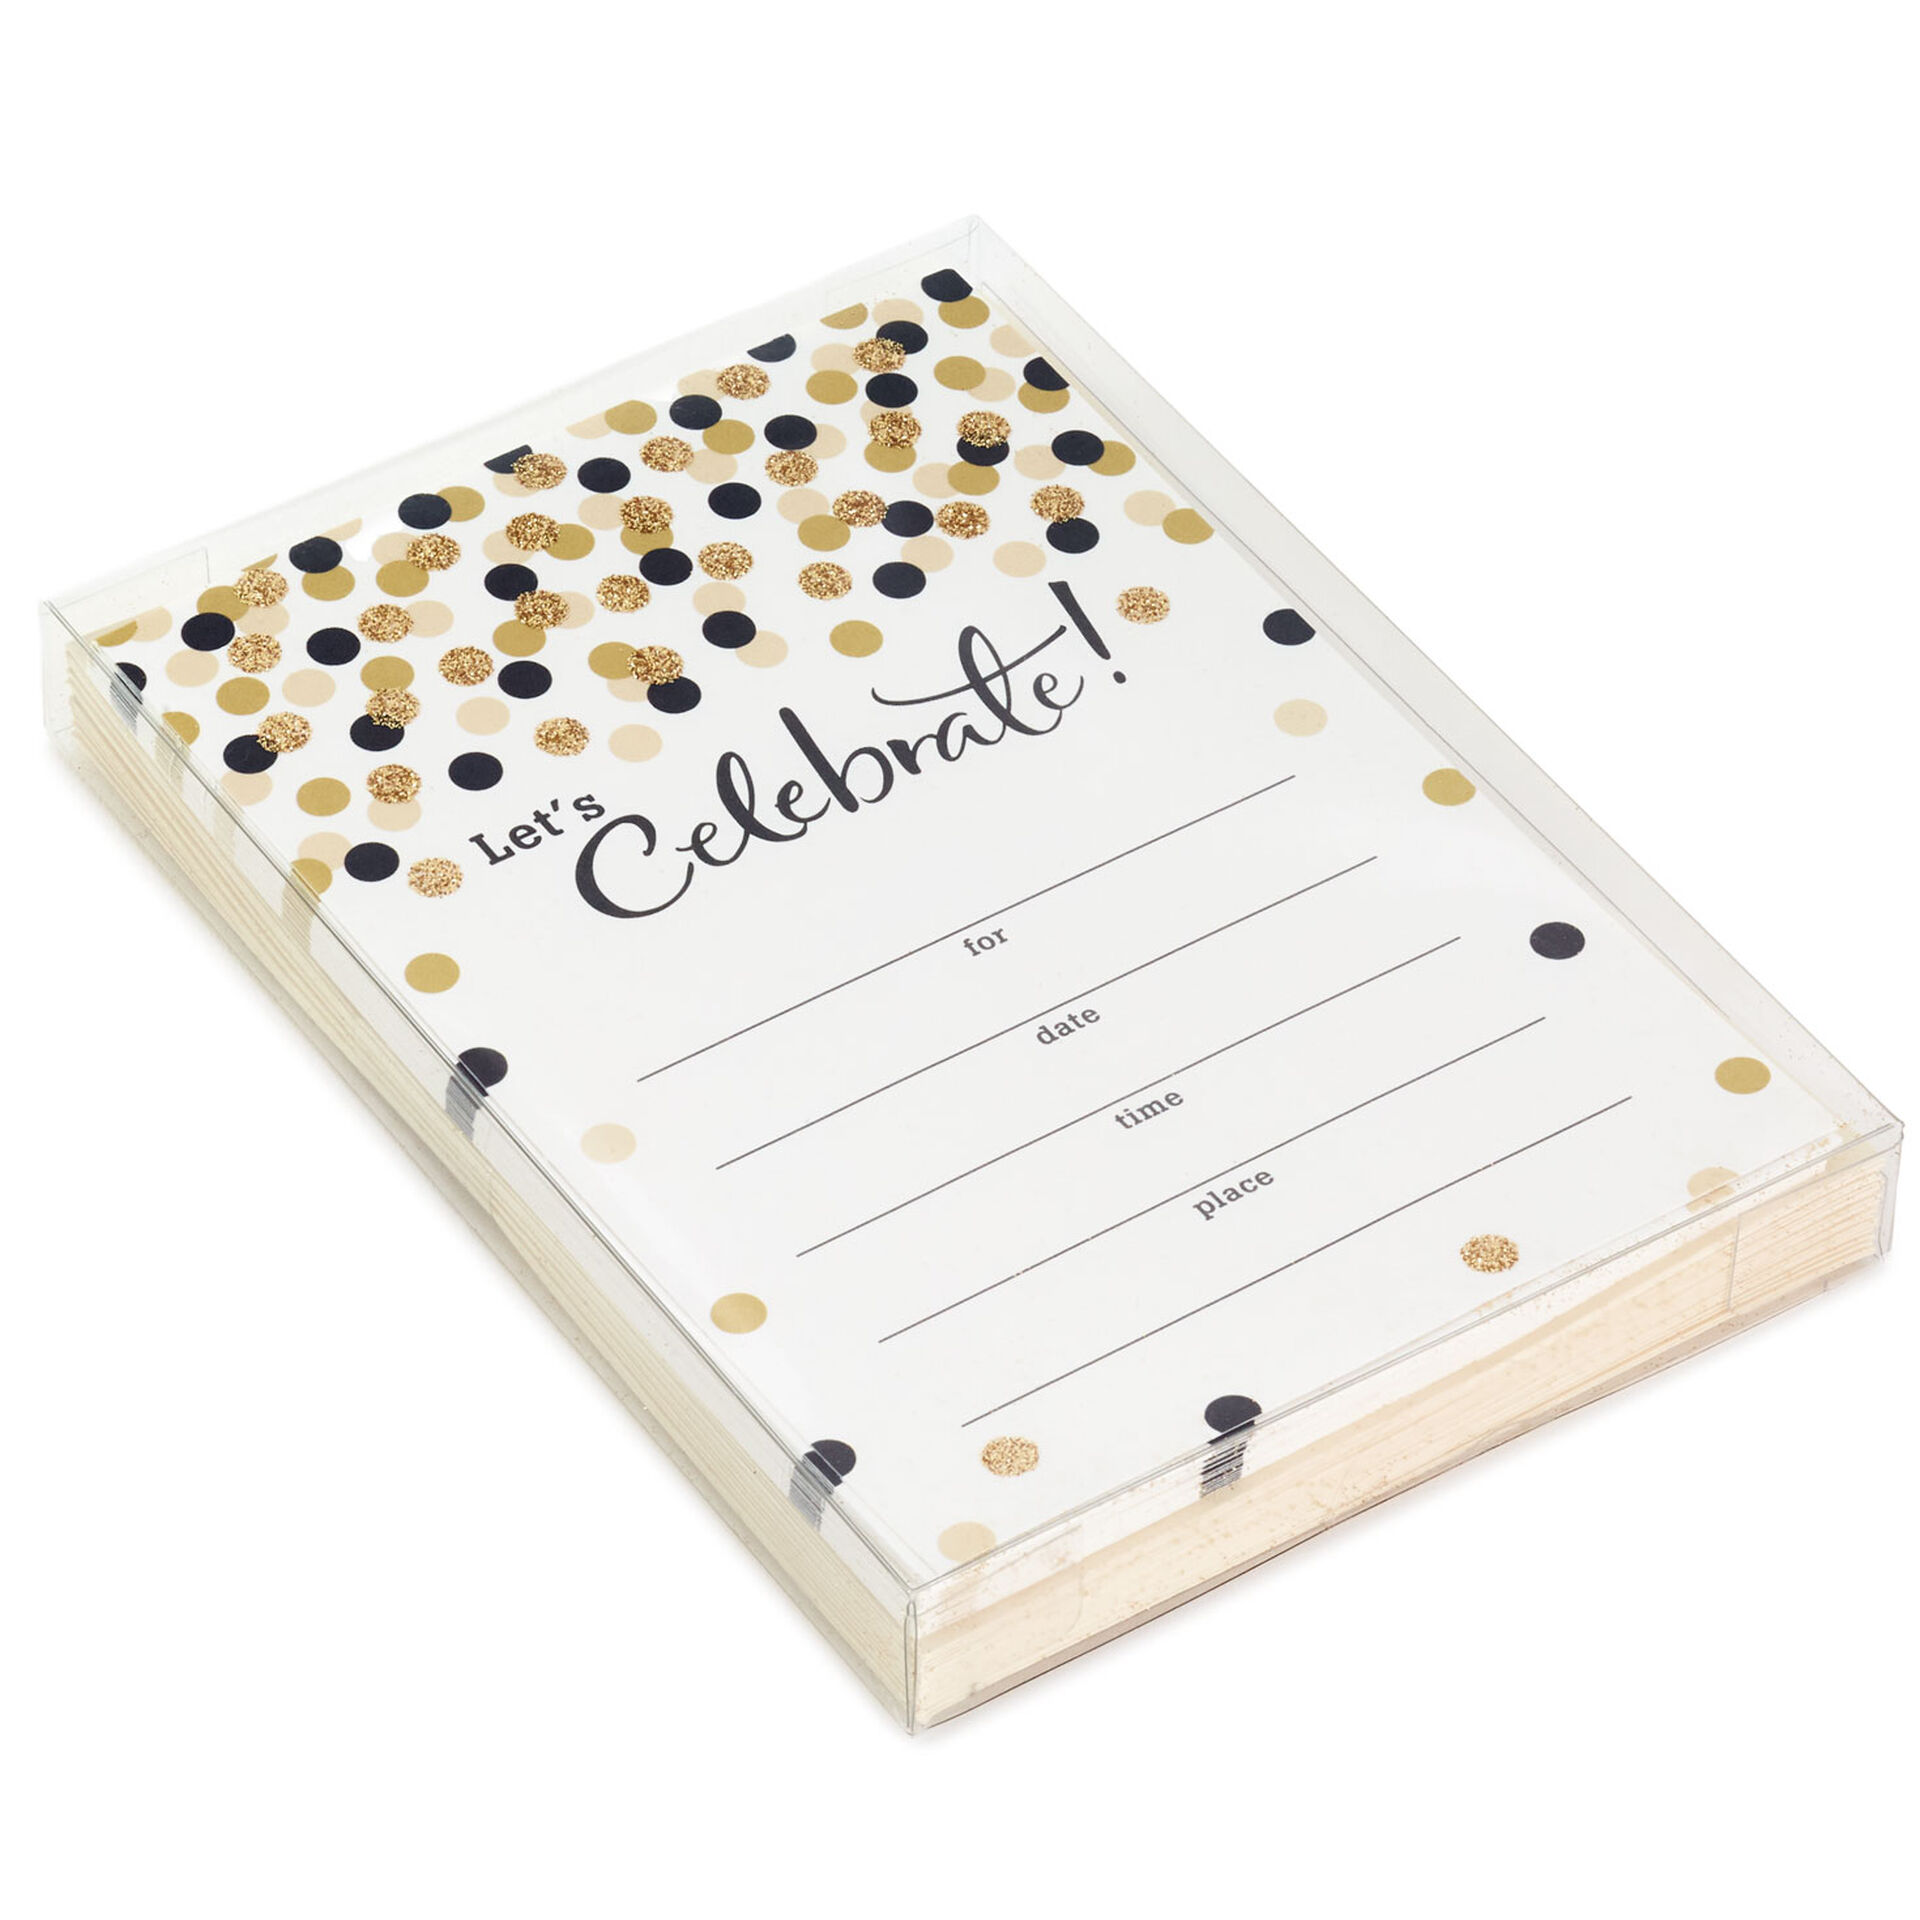 Lets-Celebrate-Gold-Dots-Party-Invitations_799NCW1049_01